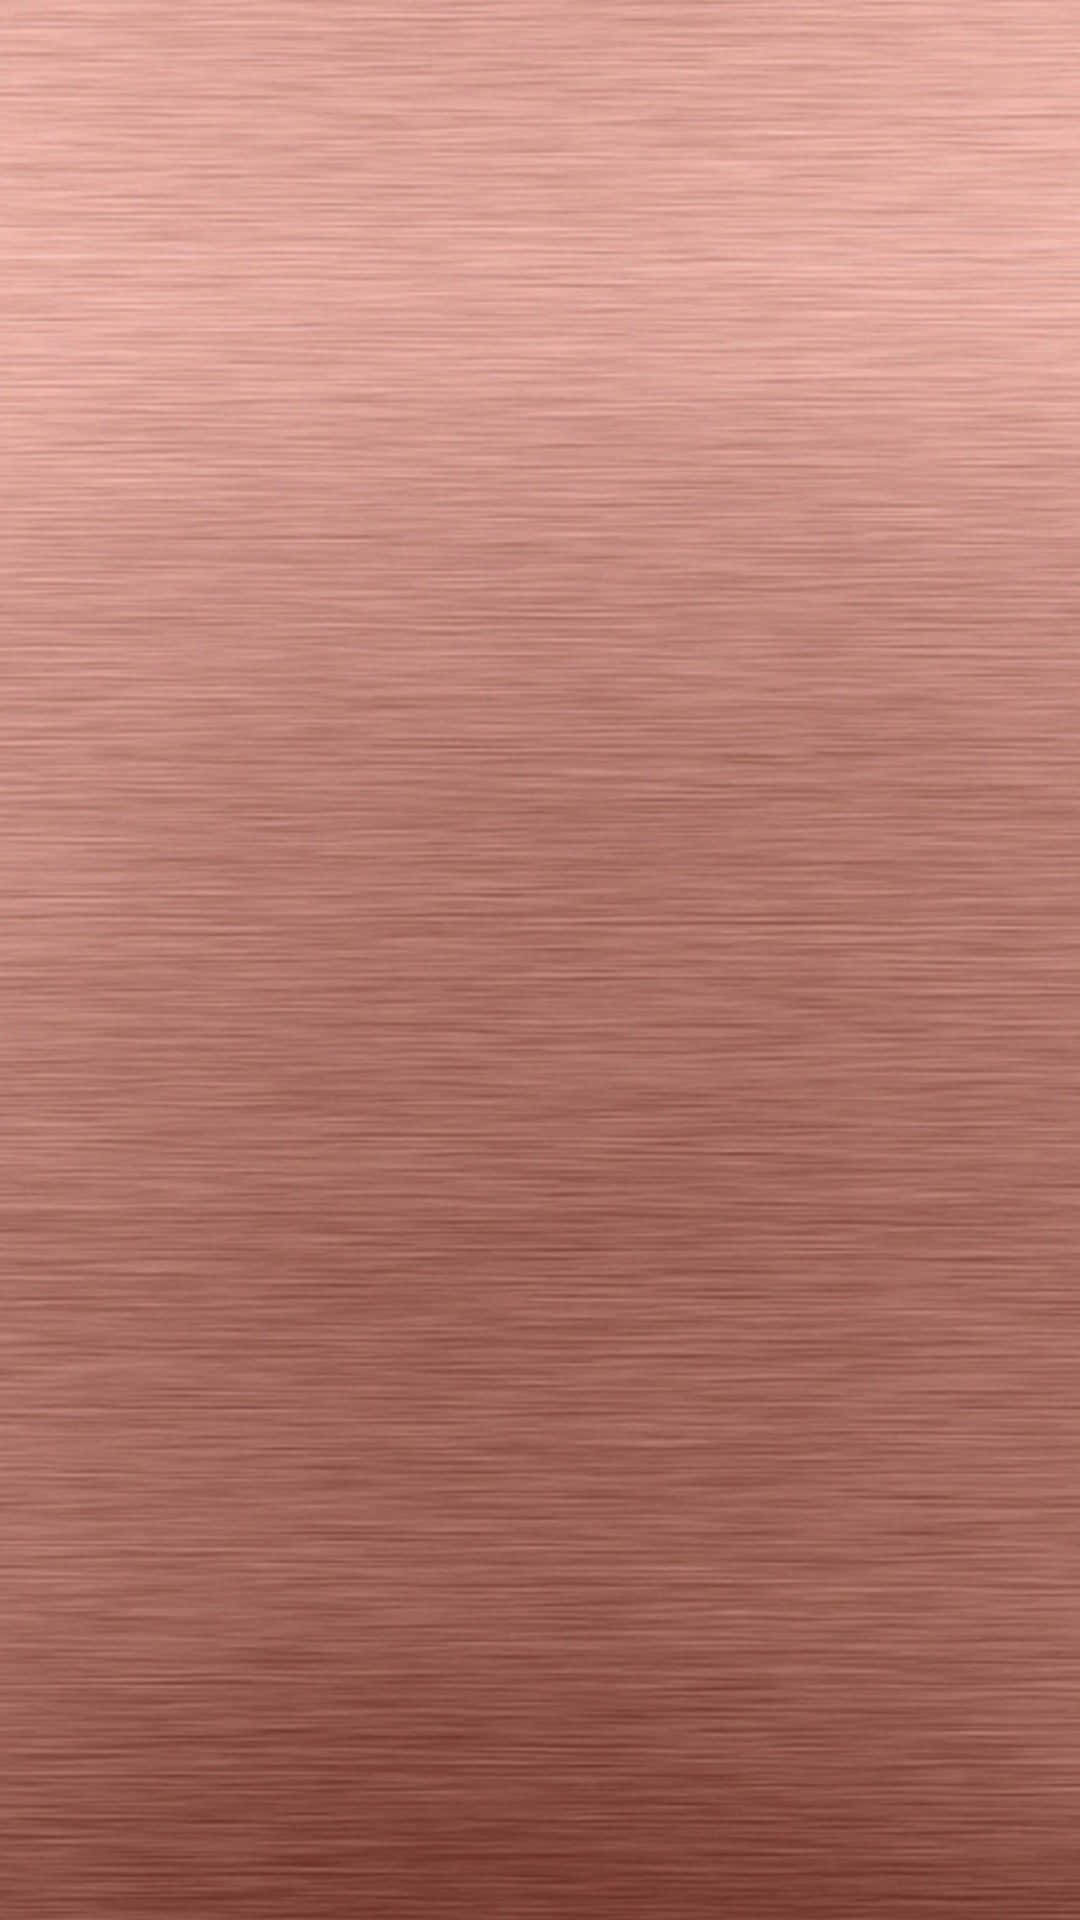 A Copper Textured Background Background